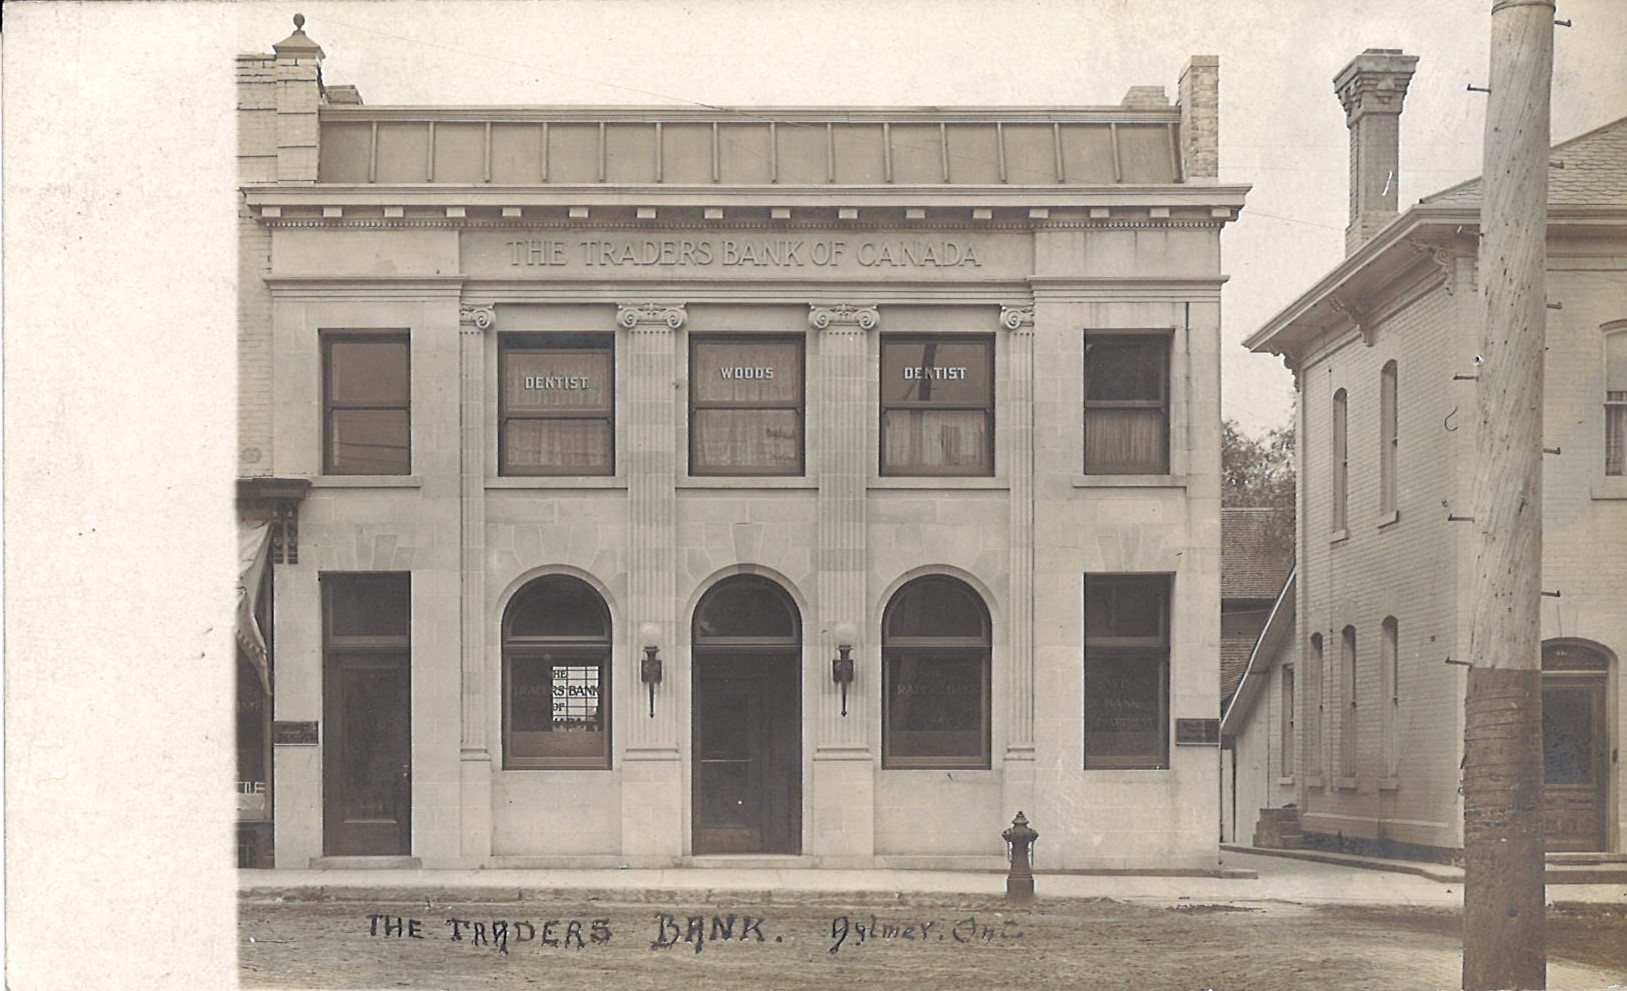 Photograph of The Traders Bank of Canada, circa 1909. The building, at the time, housed Dr. Woods, a dentist, in its upper level. The windows of the upper level read "DENTIST WOODS DENTIST". The façade of the building features four inset Ionic columns. The current façade, in comparison features four Doric columns, as the volutes of the columns' capitals are missing. 